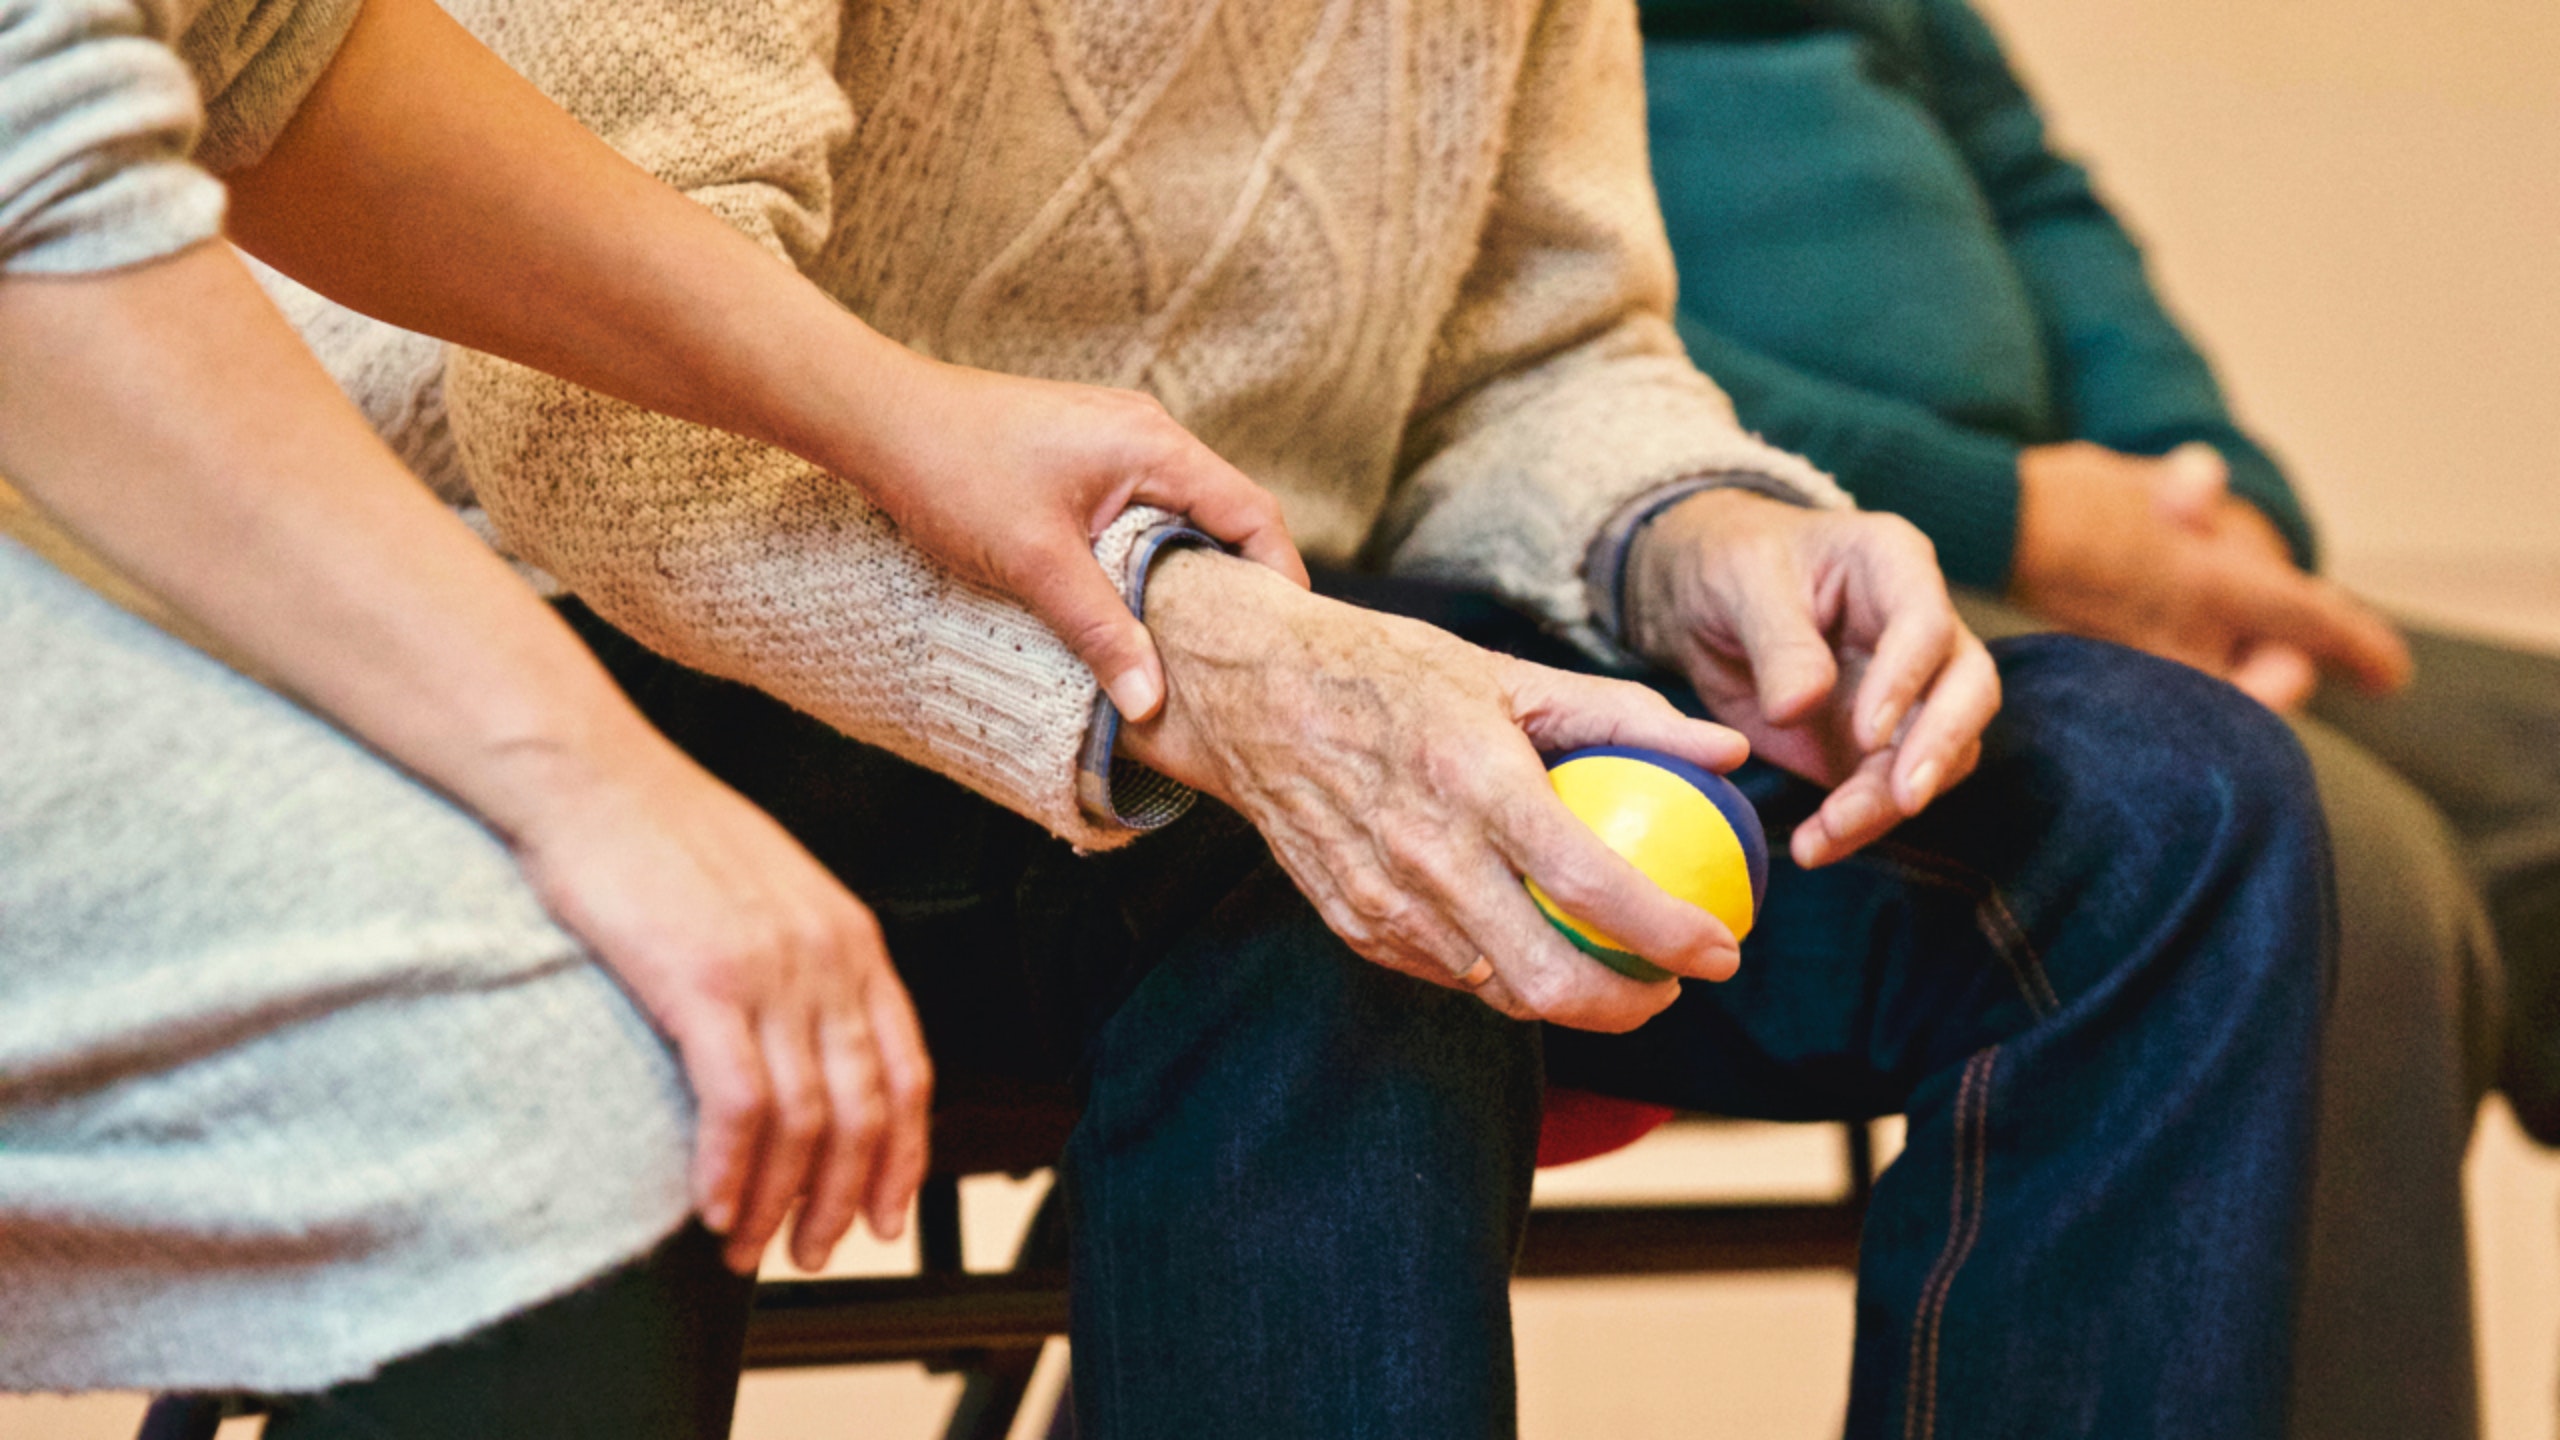 Five Things To Watch Out For When Choosing A Nursing Home